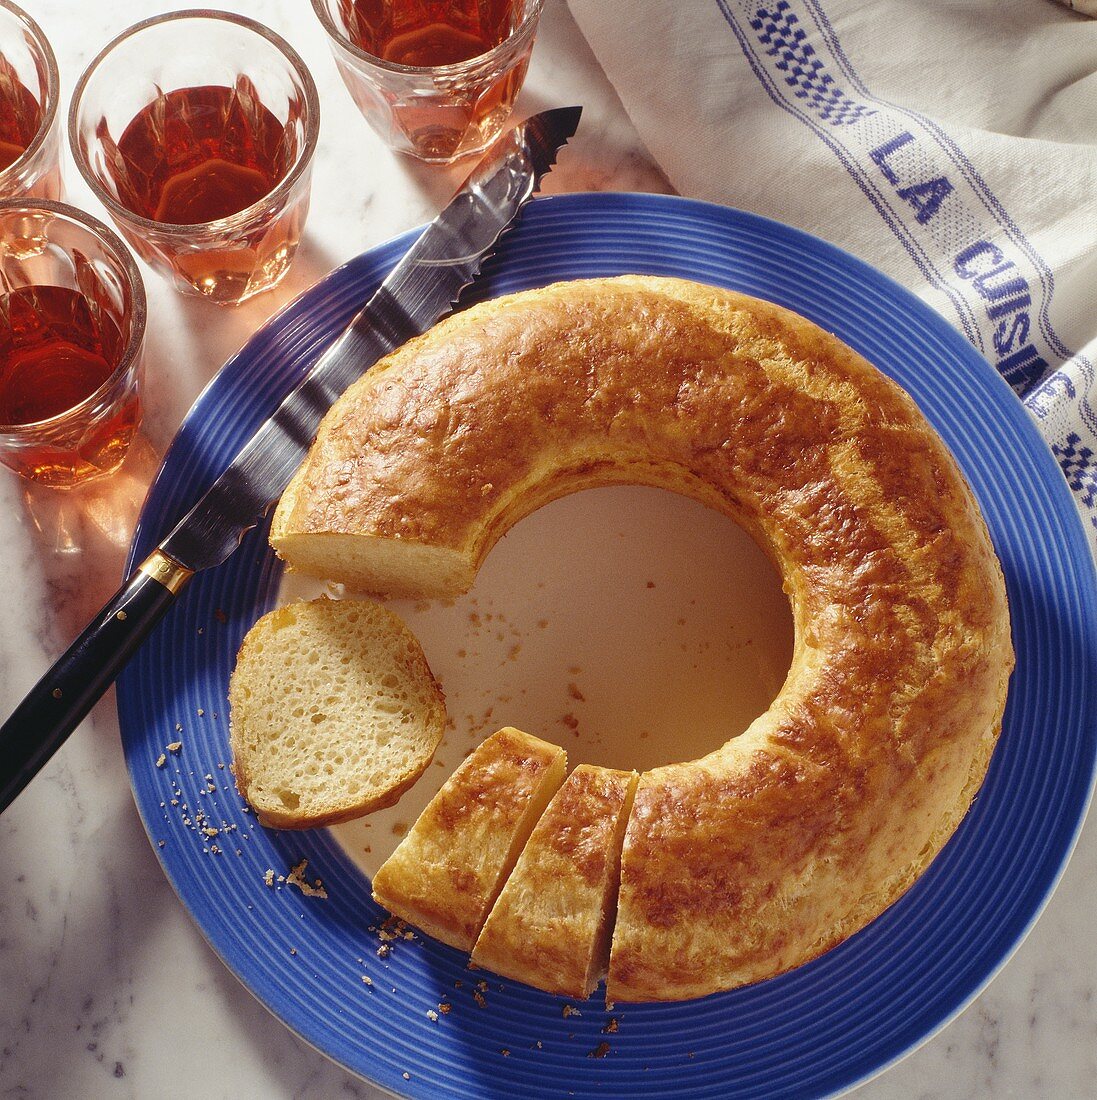 Baked Cheese Brioche in Ring Form, partially sliced, on blue Plate